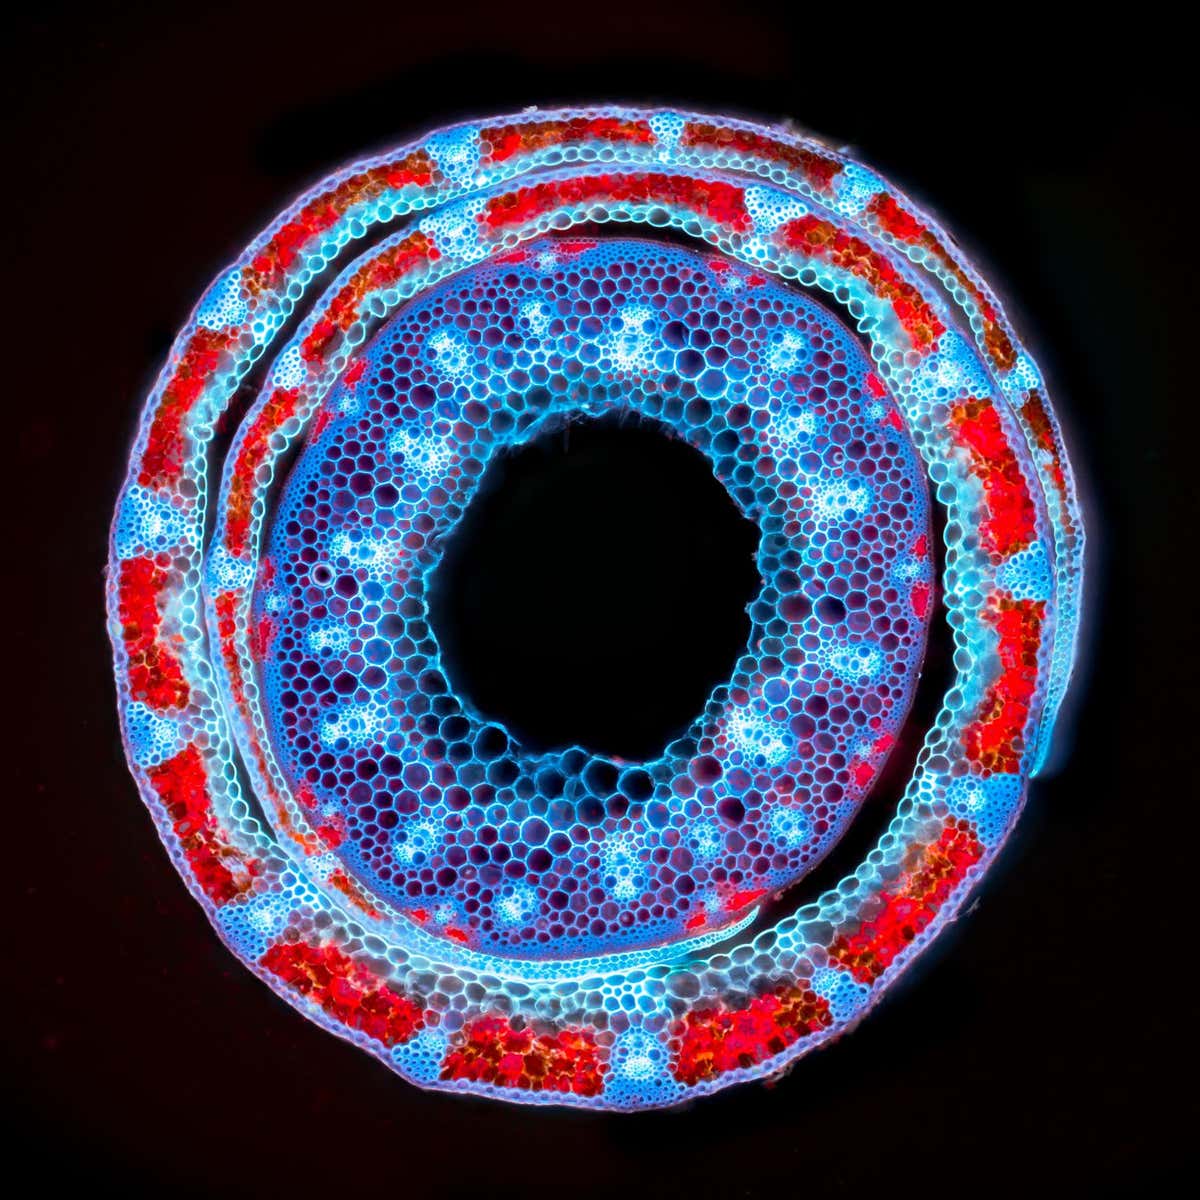 Plant microverse. Cross-section through the Hordeum grass. The ring in the middle is a culm ? a typical hollow stalk of the grass. It is very stiff, you can see that almost all of the cells have cell walls reinforced by lignin with blue autofluorescence. On the outside, there is a leaf wrapped around the stalk. Red autofluorescence shows photosynthetically active tissue with chlorophyll content. Autofluorescence in UV light, focus stacking.